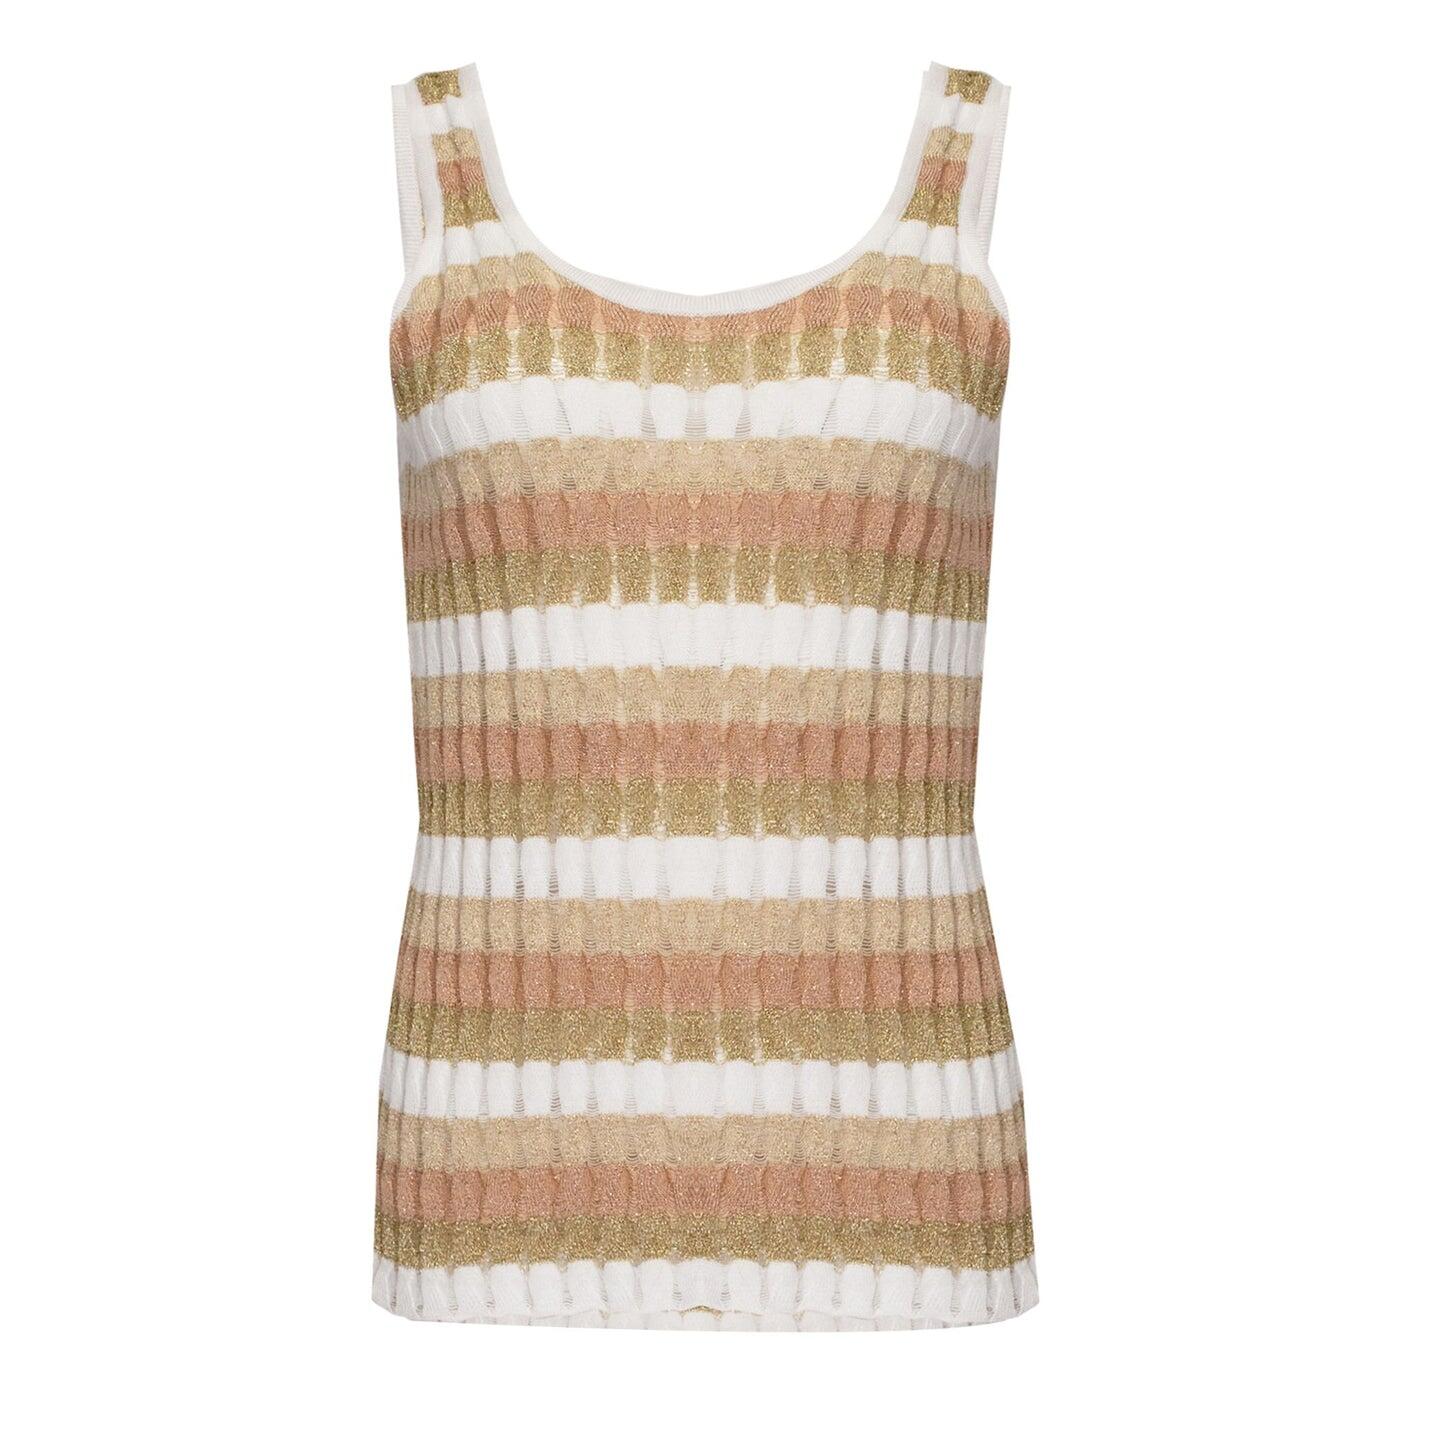 Load image into Gallery viewer, Tank Top in Racking Knit White/Gold/Peach/Beige
